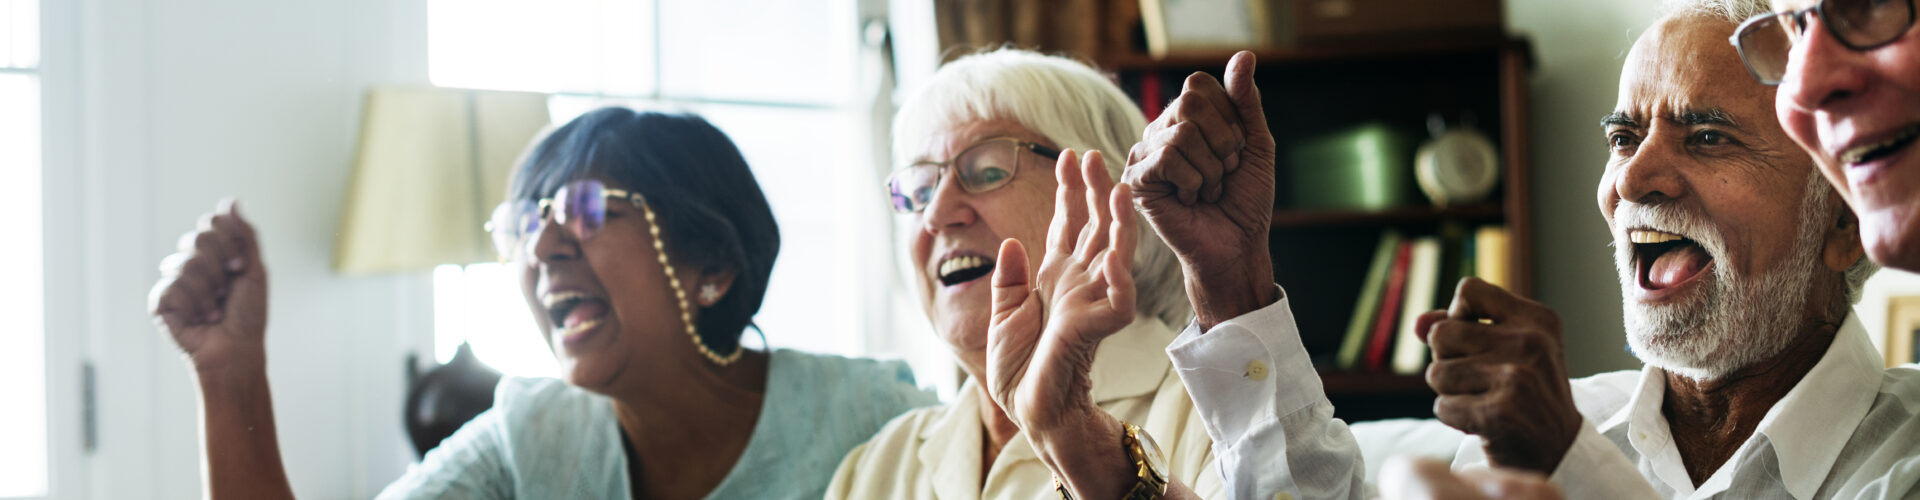 Senior people watching televison together in a care home